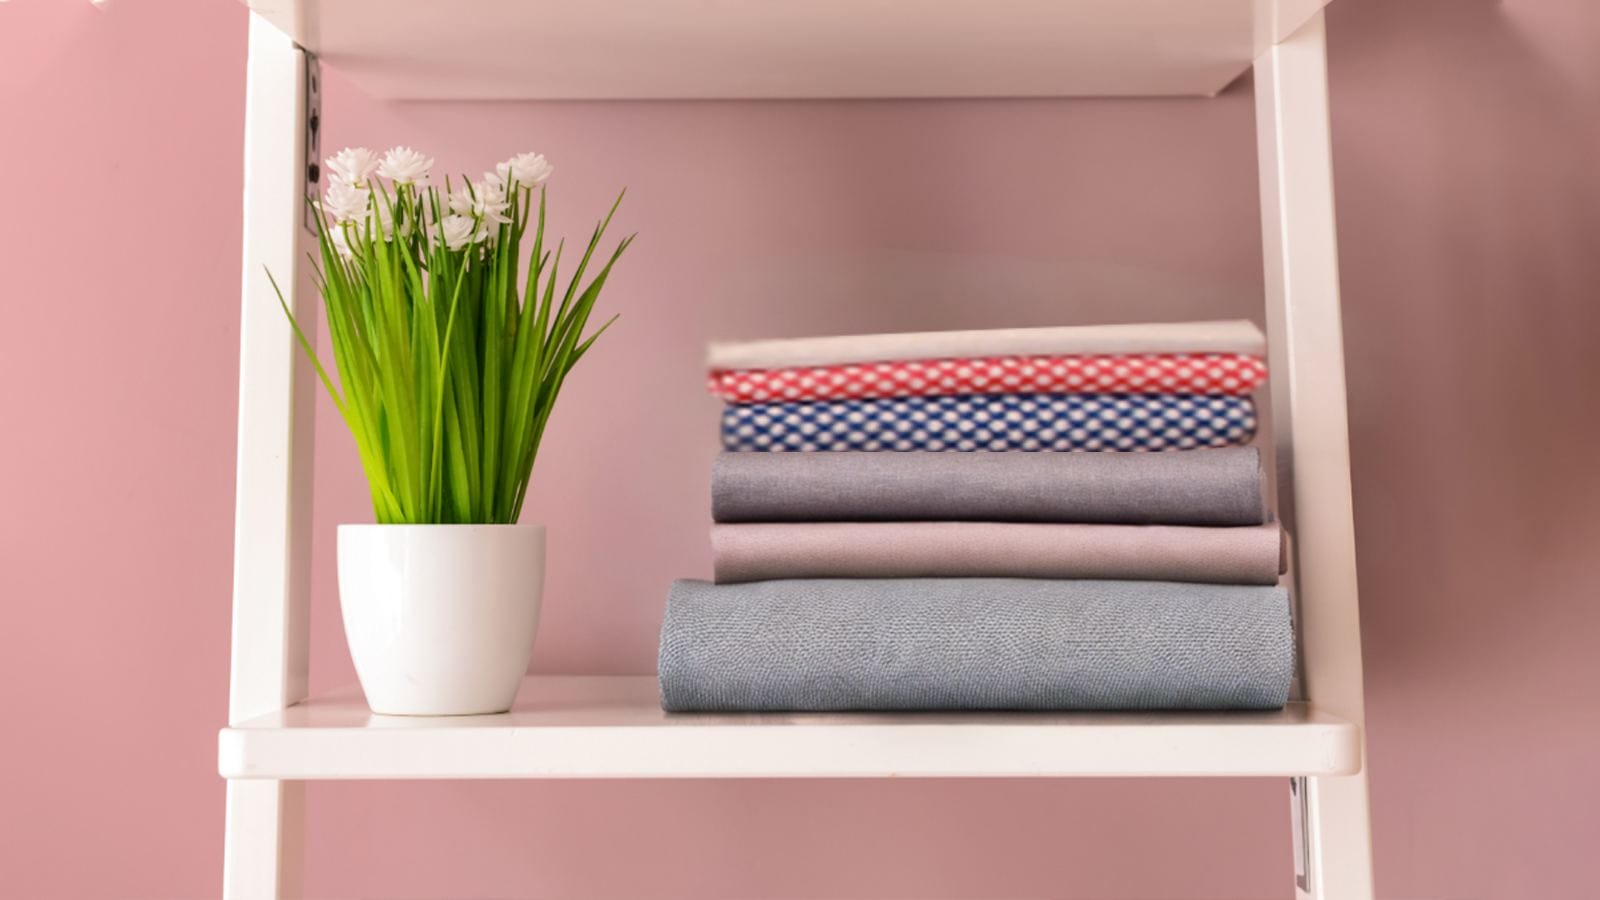 A stack of fabrics on a white ladder against a pink wall.